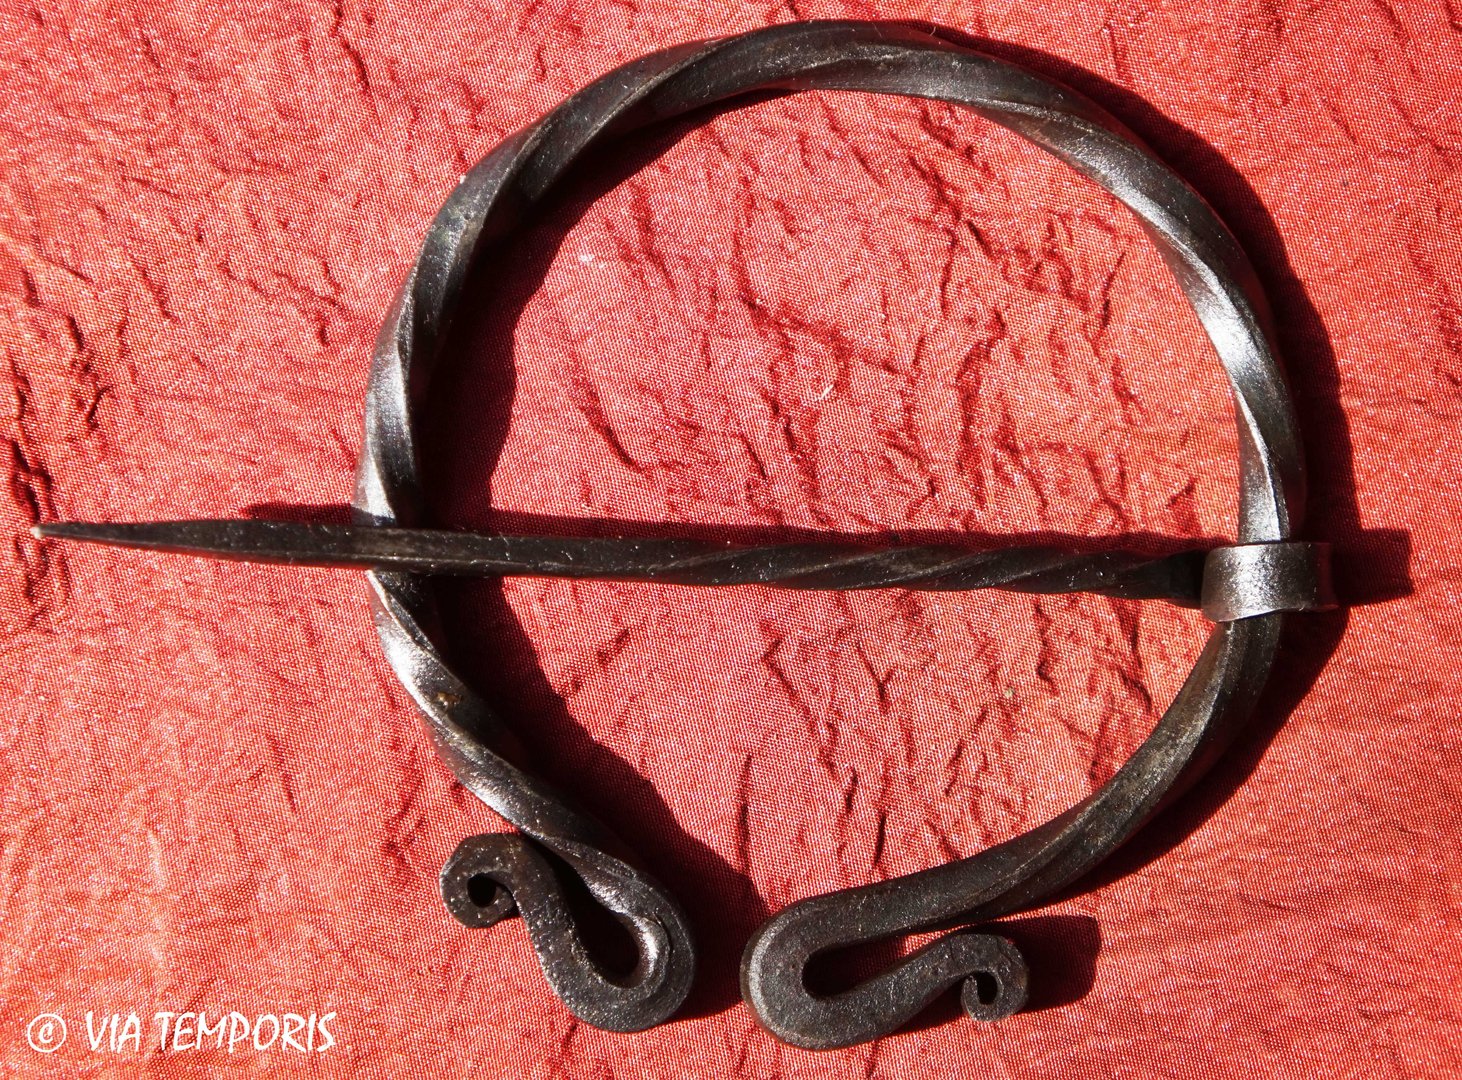 MEDIEVAL JEWELRY - LARGE MEDIEVAL FIBULA IN IRON